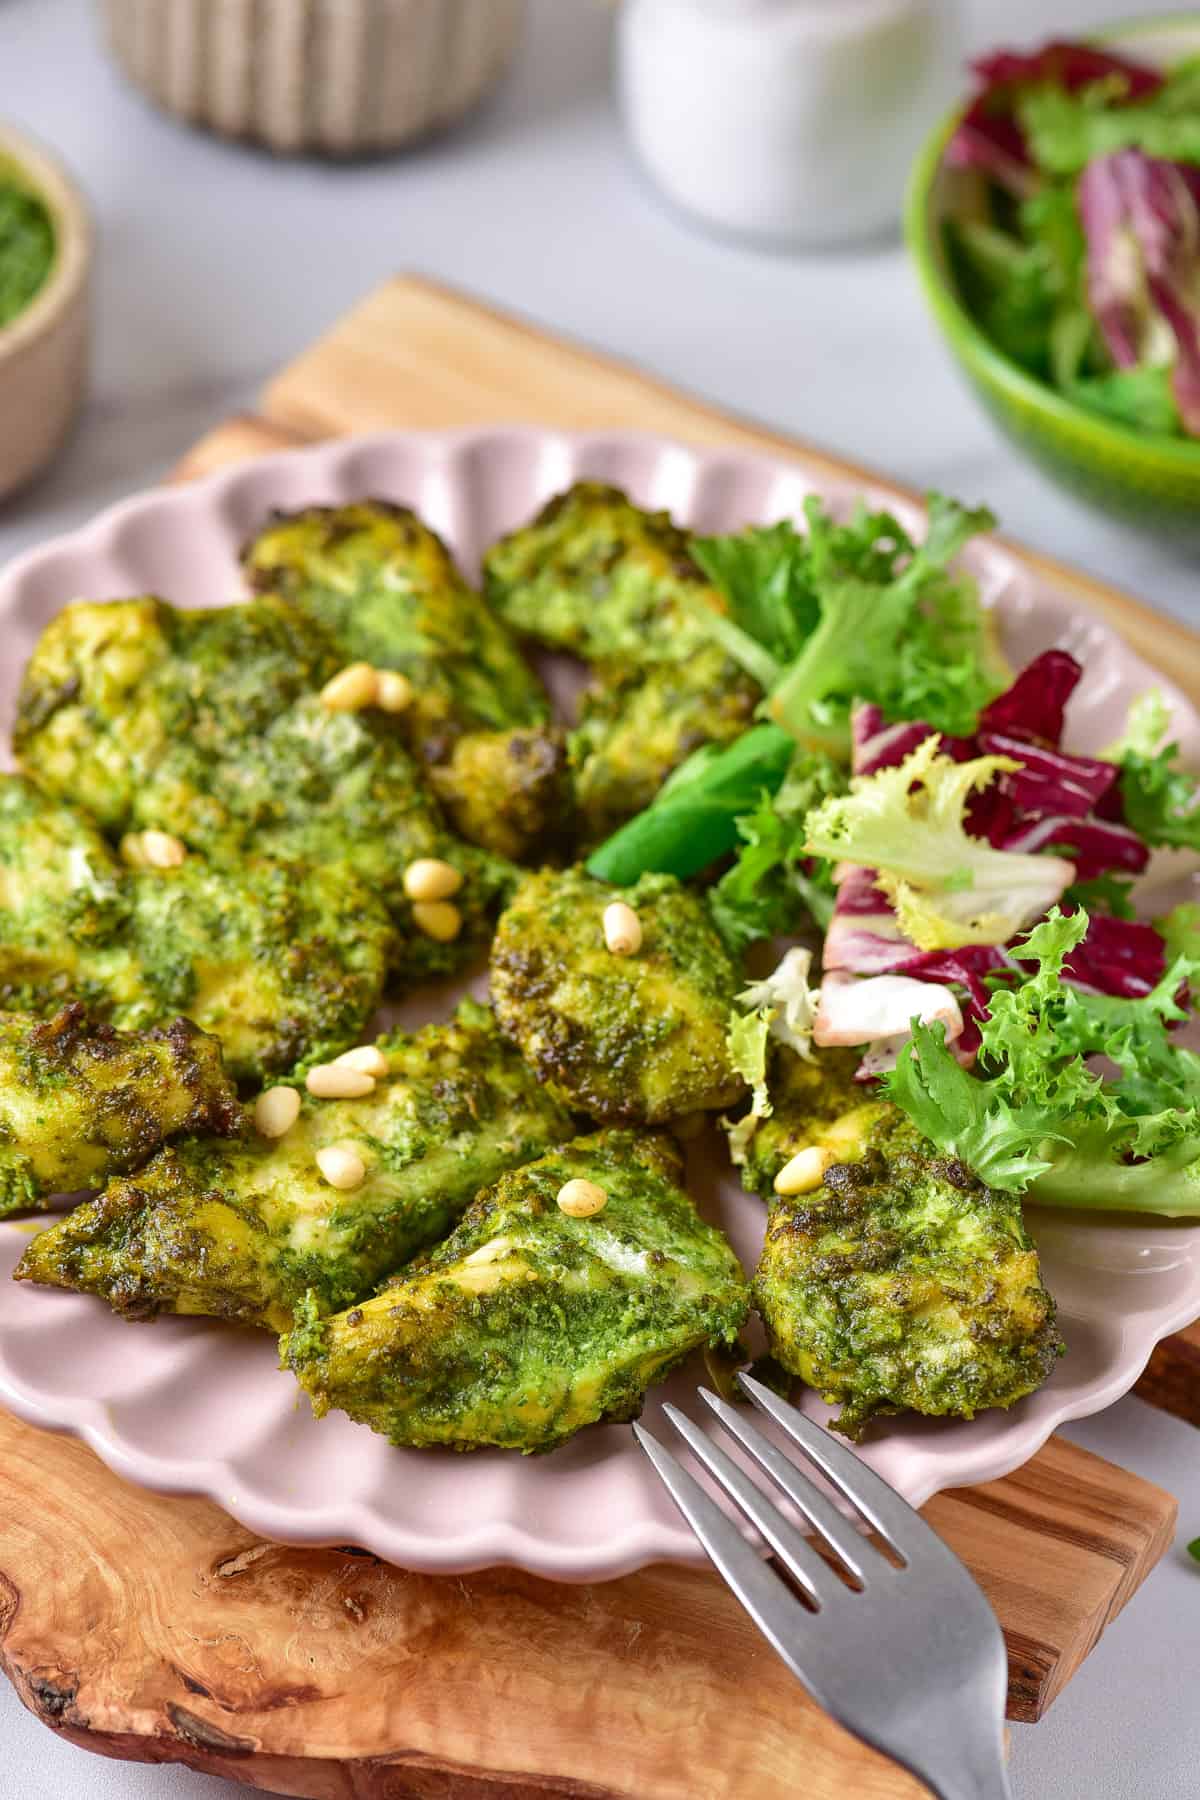 Plate with a pile of basil pesto chicken bites and salad.